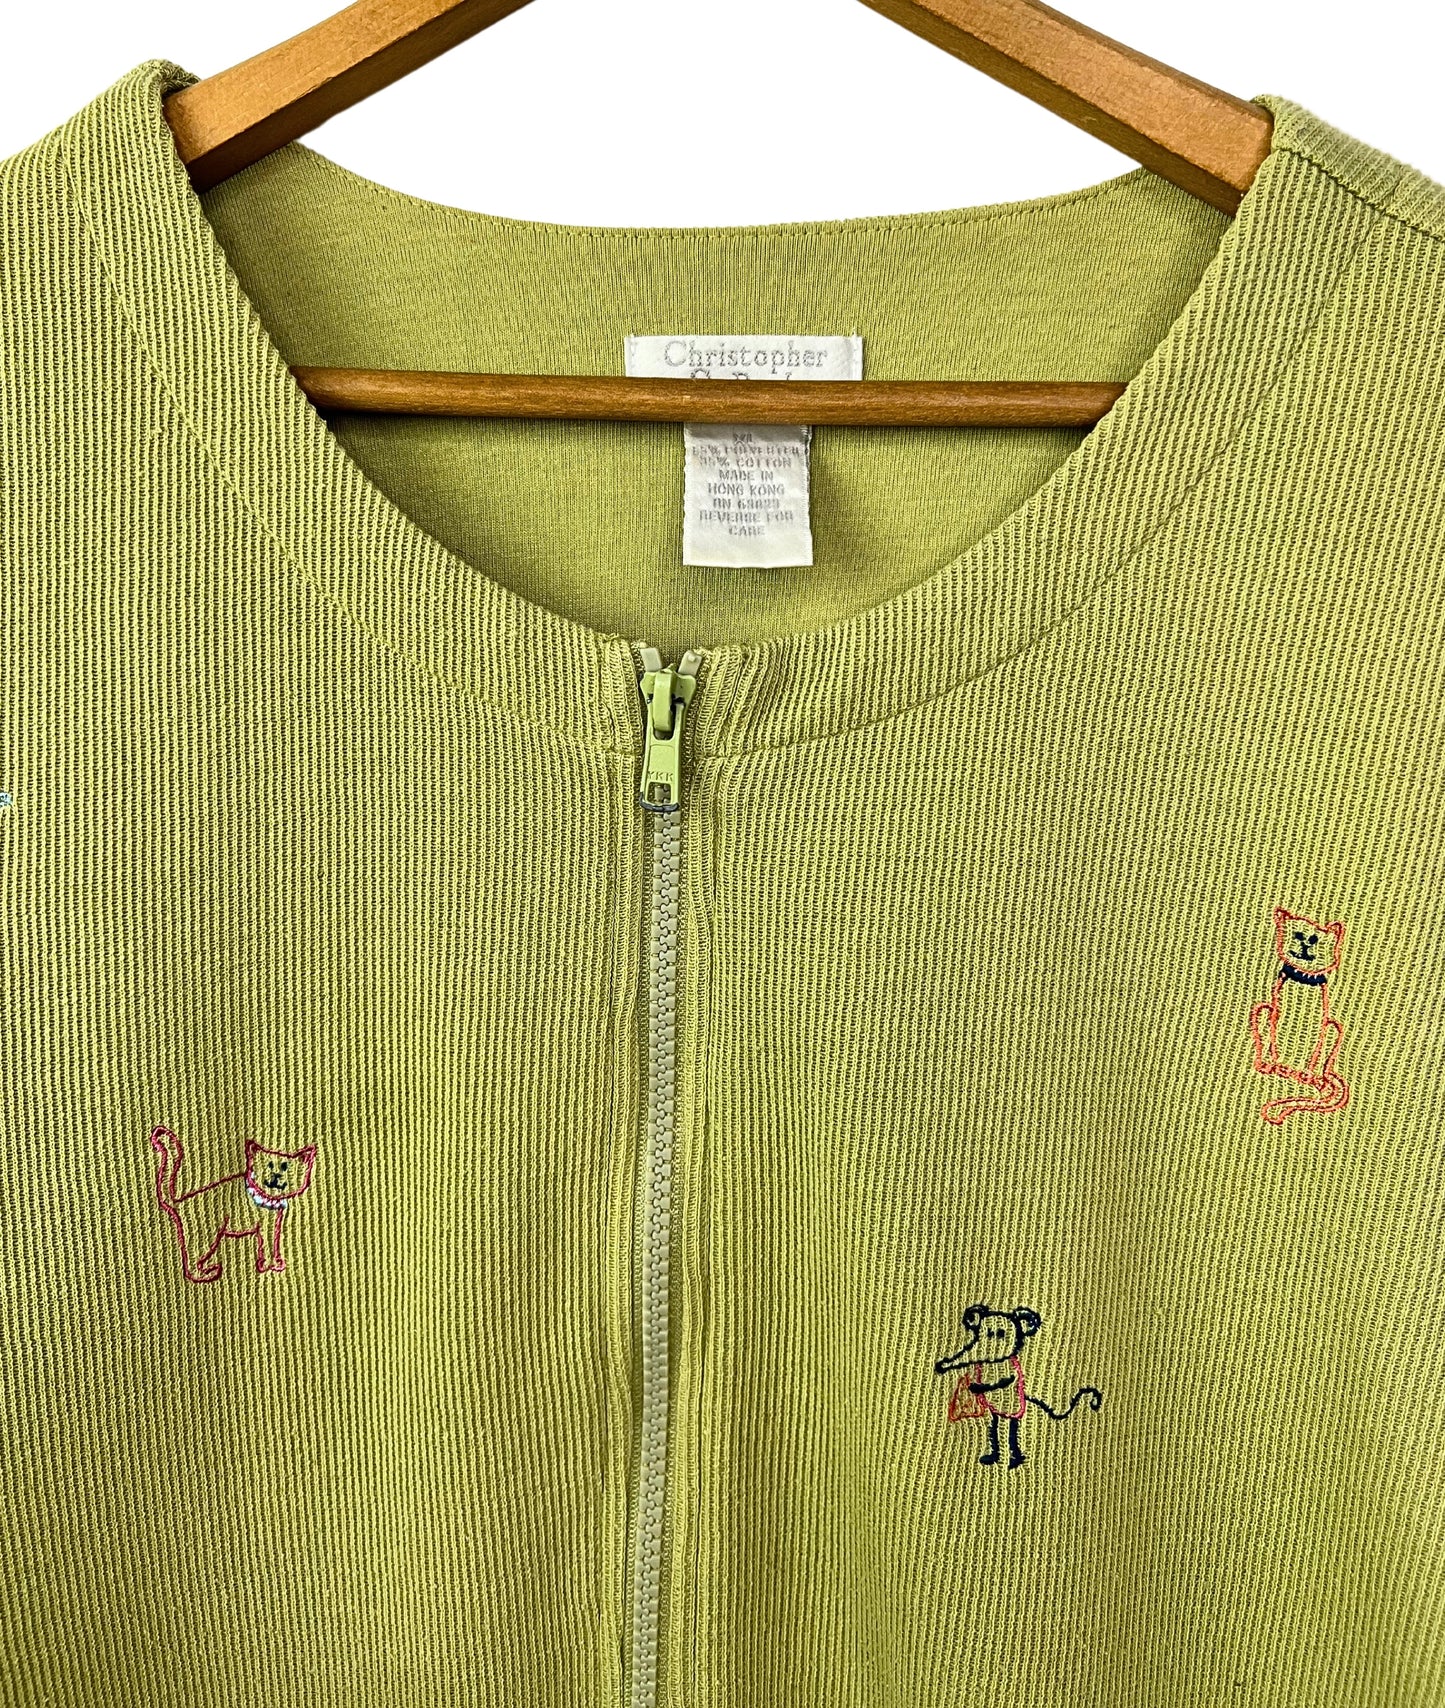 90’s Cat + Mouse Zipup Sweater